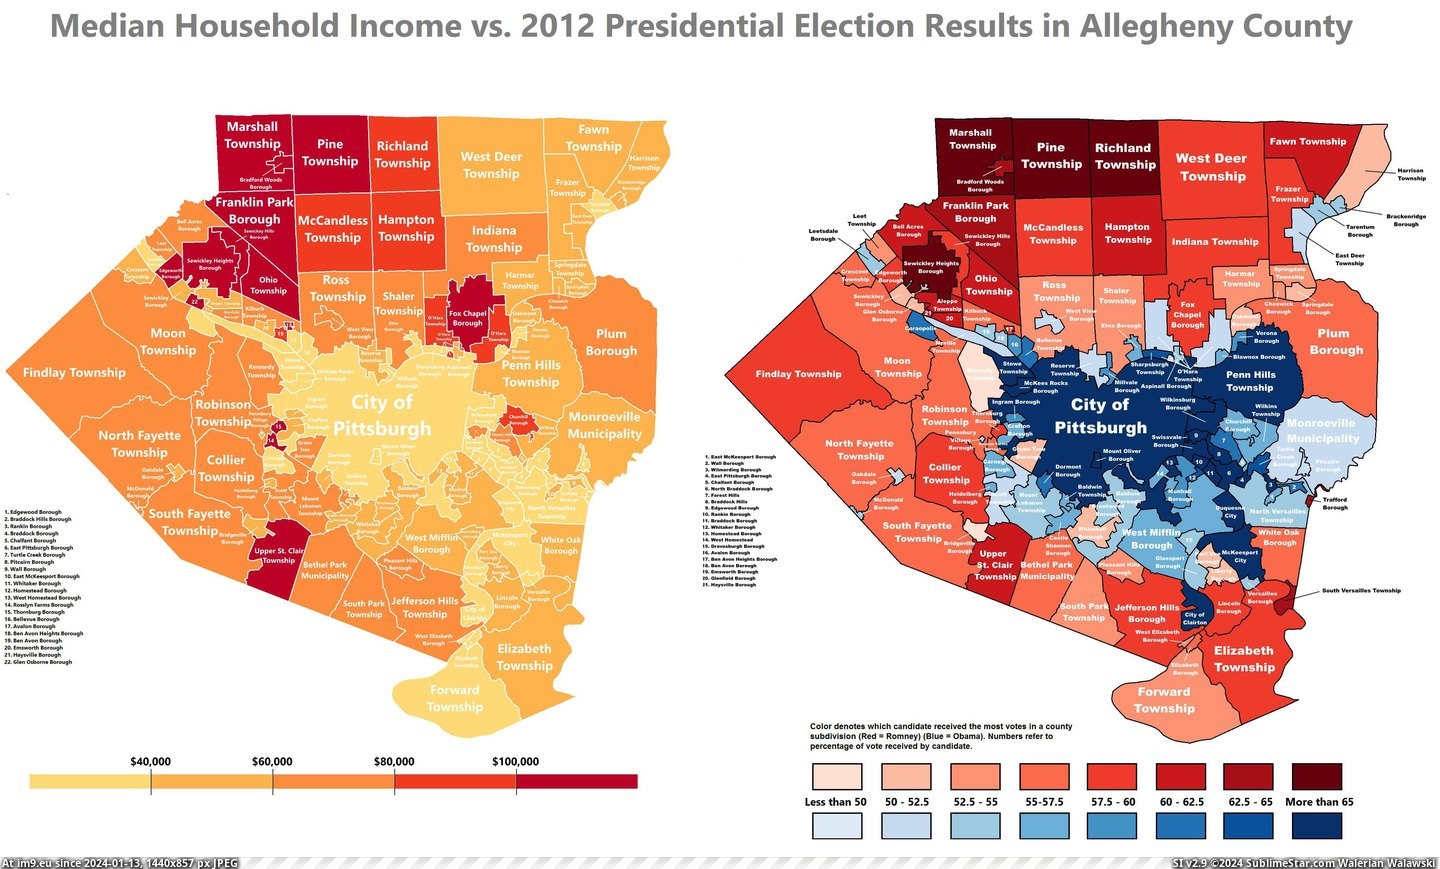 #County #Results #Elections #Pittsburgh #Household #Income #Presidential #Median [Mapporn] Median Household Income vs. 2012 Presidential Elections Results in Allegheny County (Pittsburgh) [4232x2532] Pic. (Изображение из альбом My r/MAPS favs))